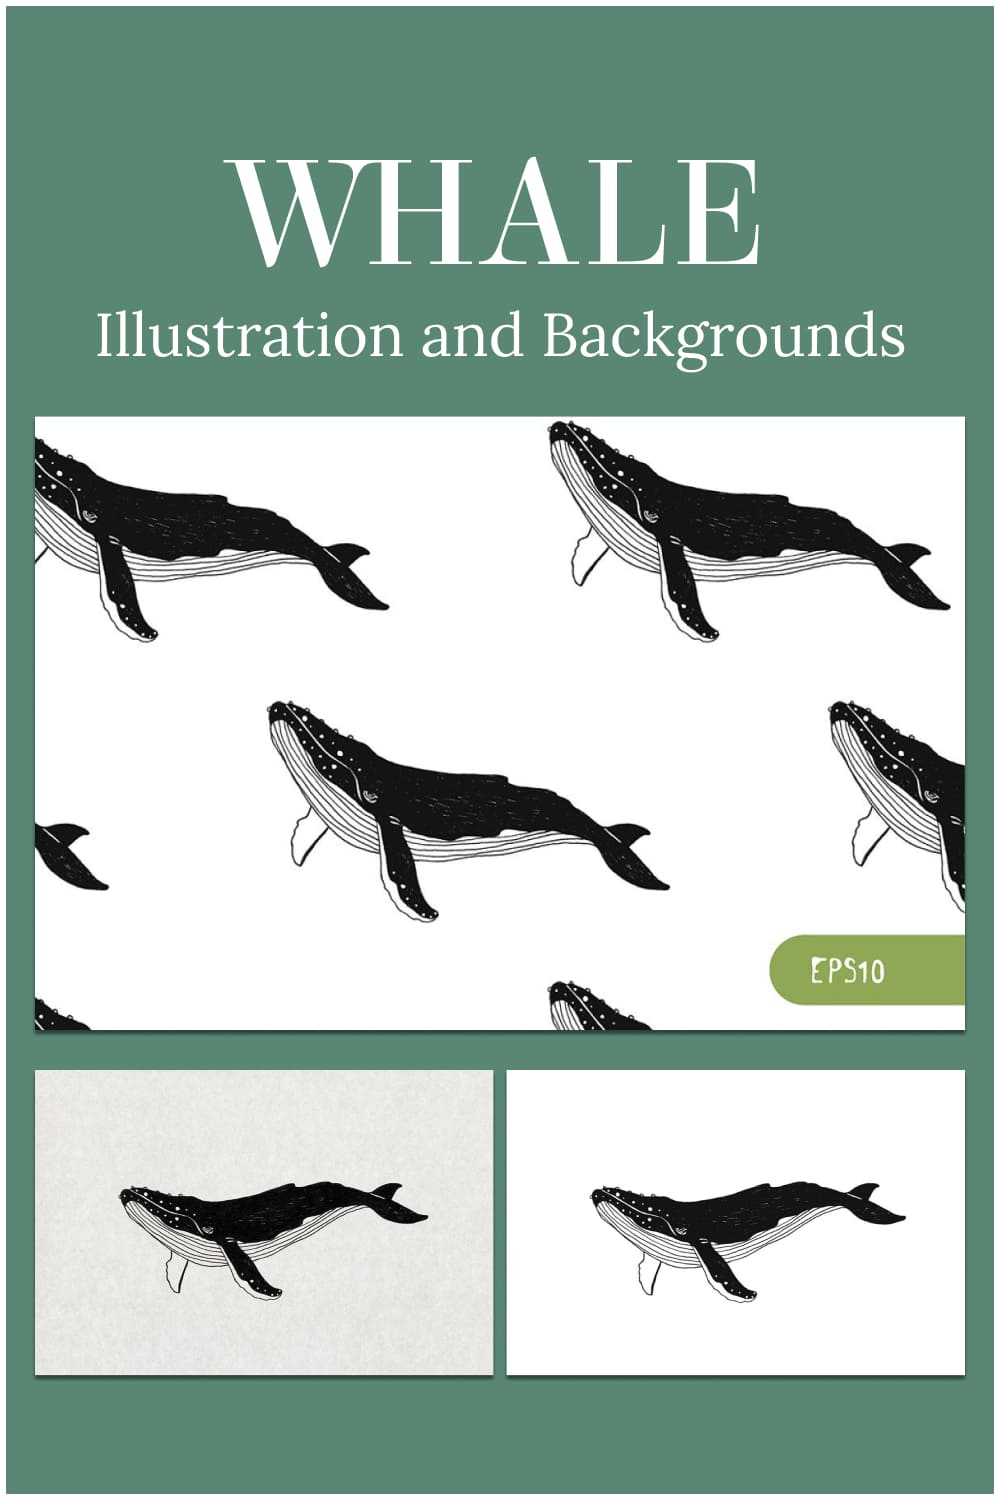 whale illustration and backgrounds clipart.